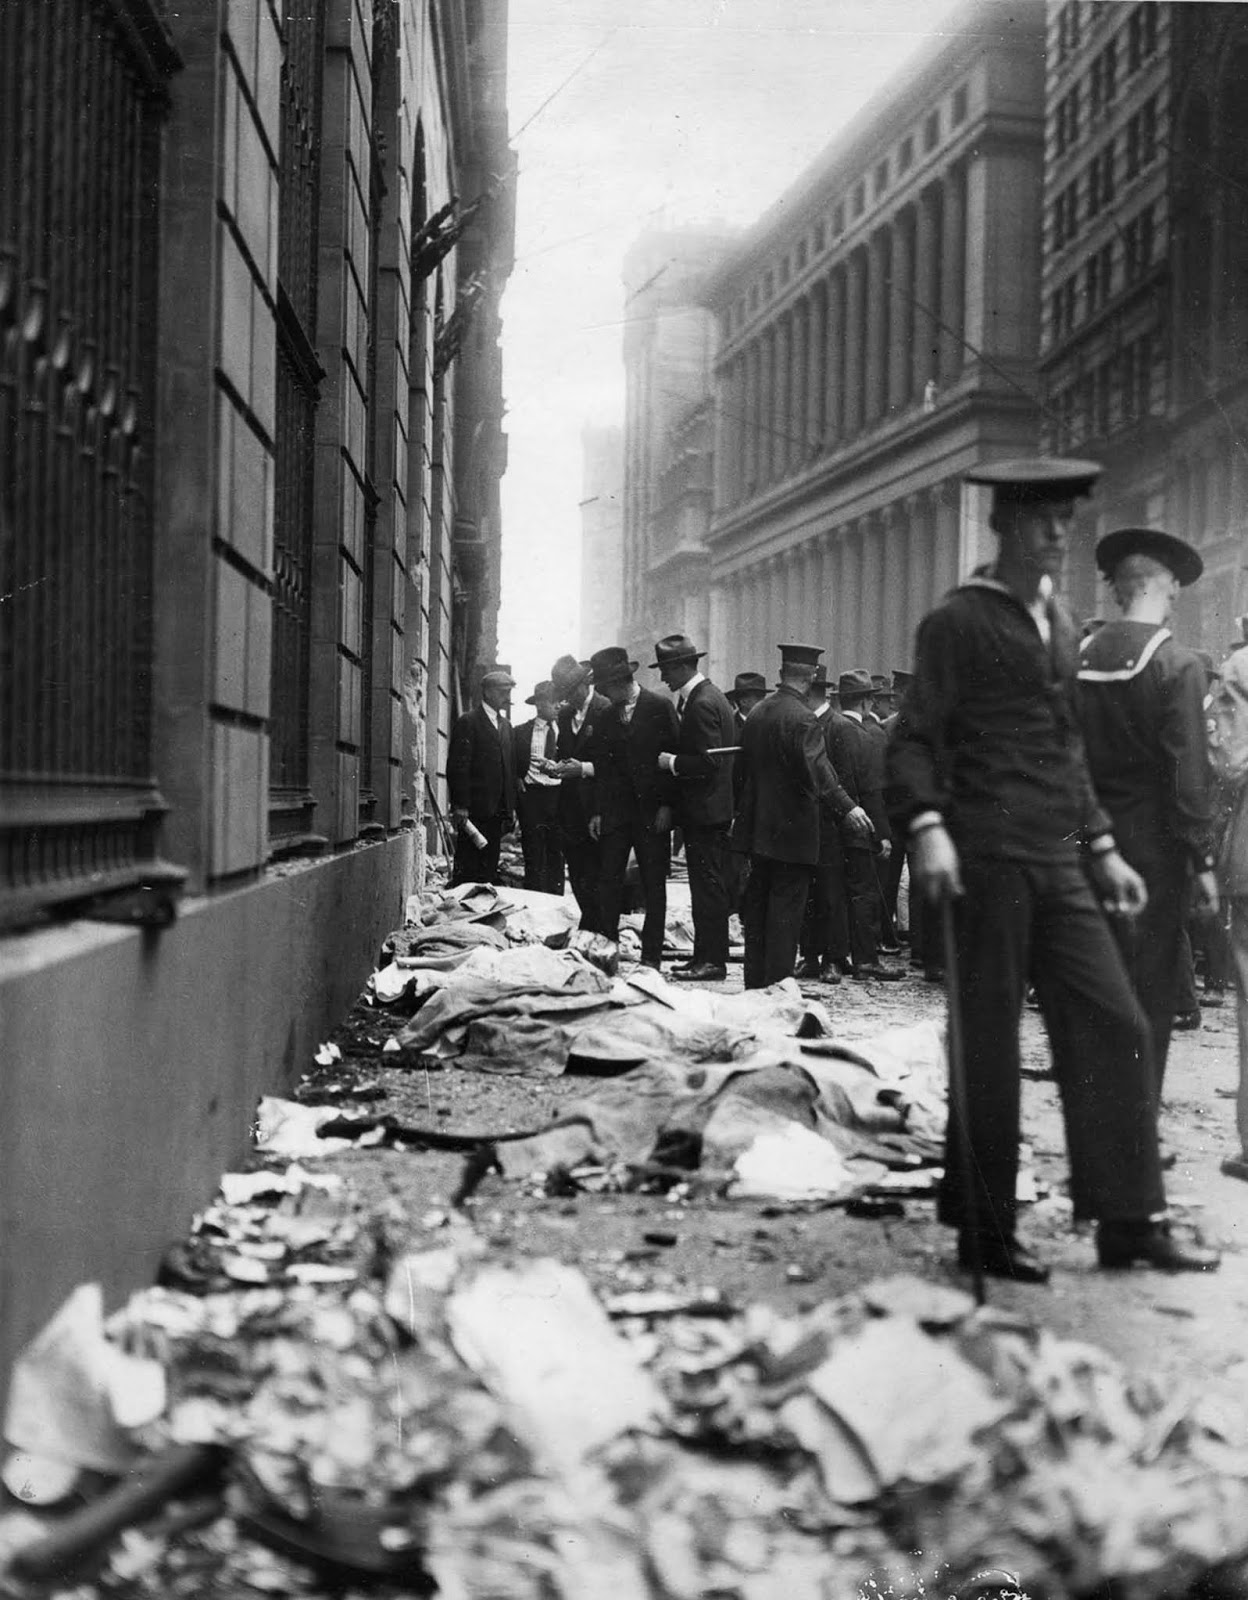 Often throughout the Gilded Age was radical ideology and violence used as a form of protest by groups to initiate change.